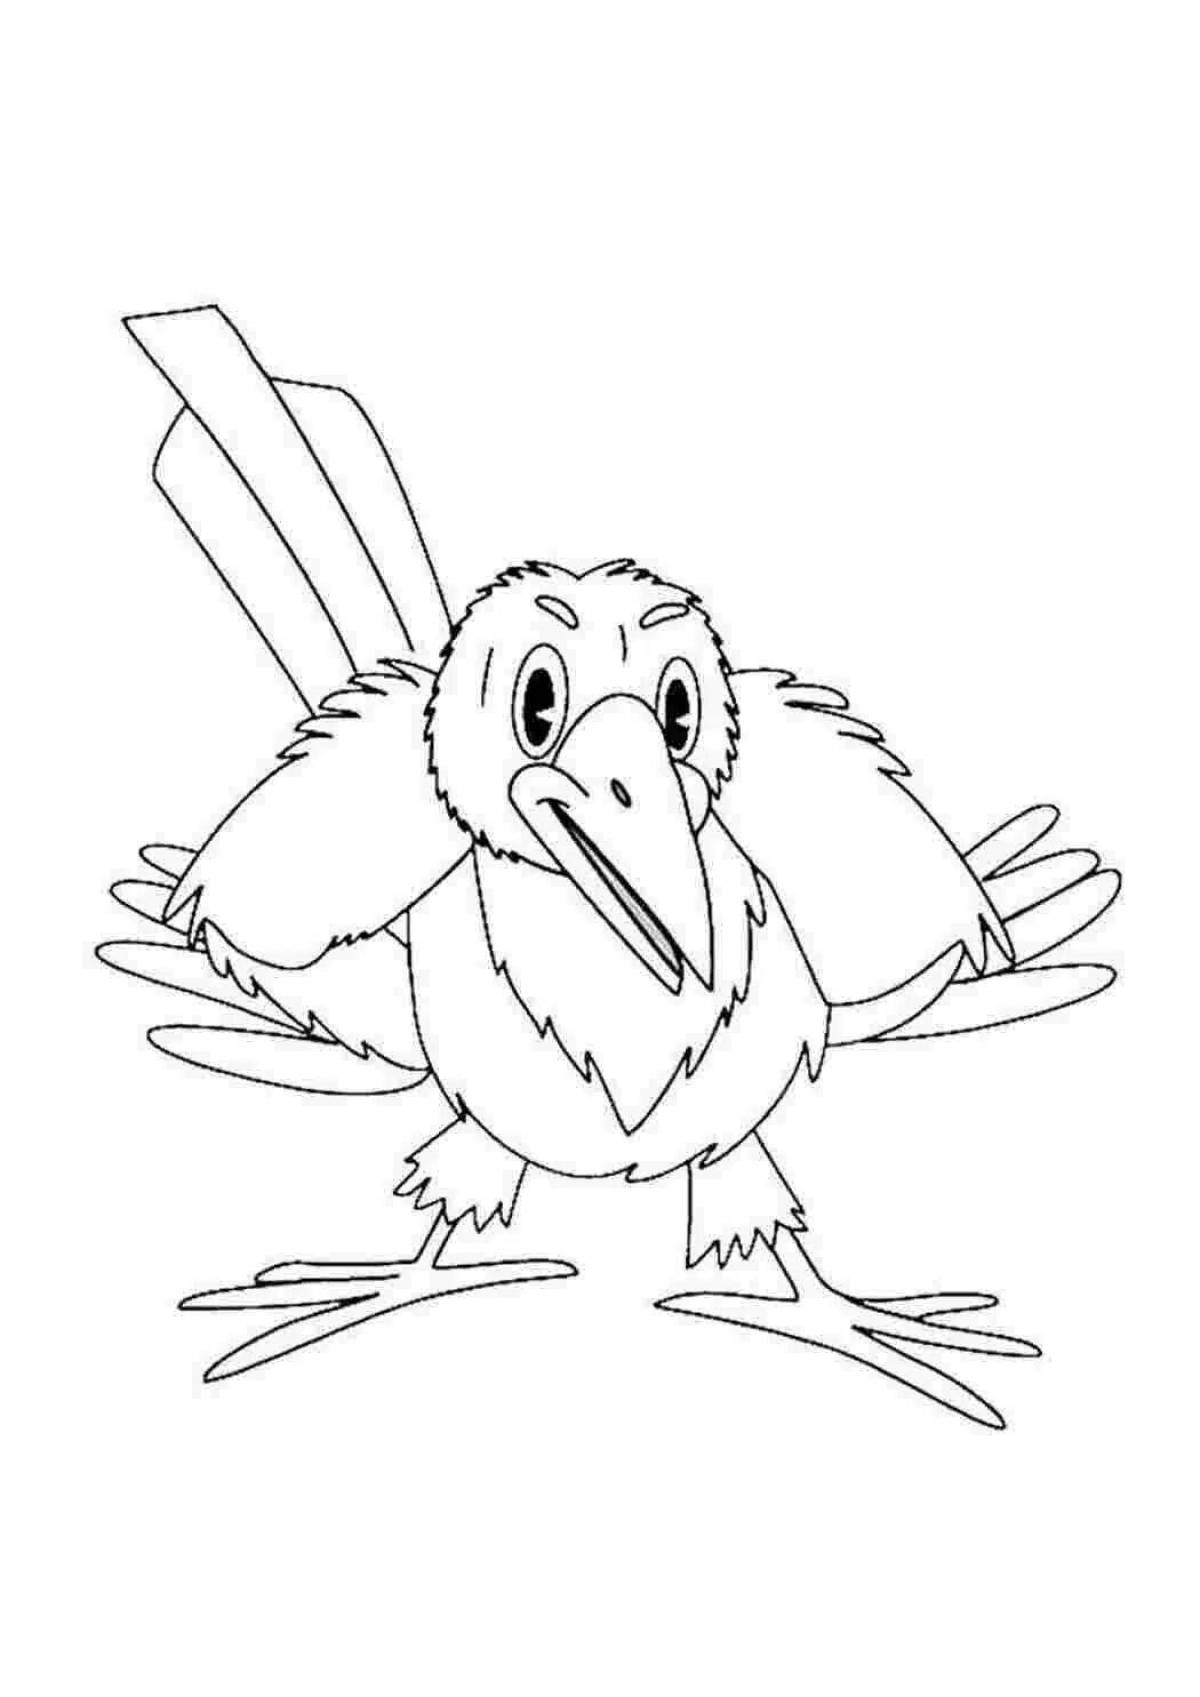 Fat crow coloring book for children 3-4 years old